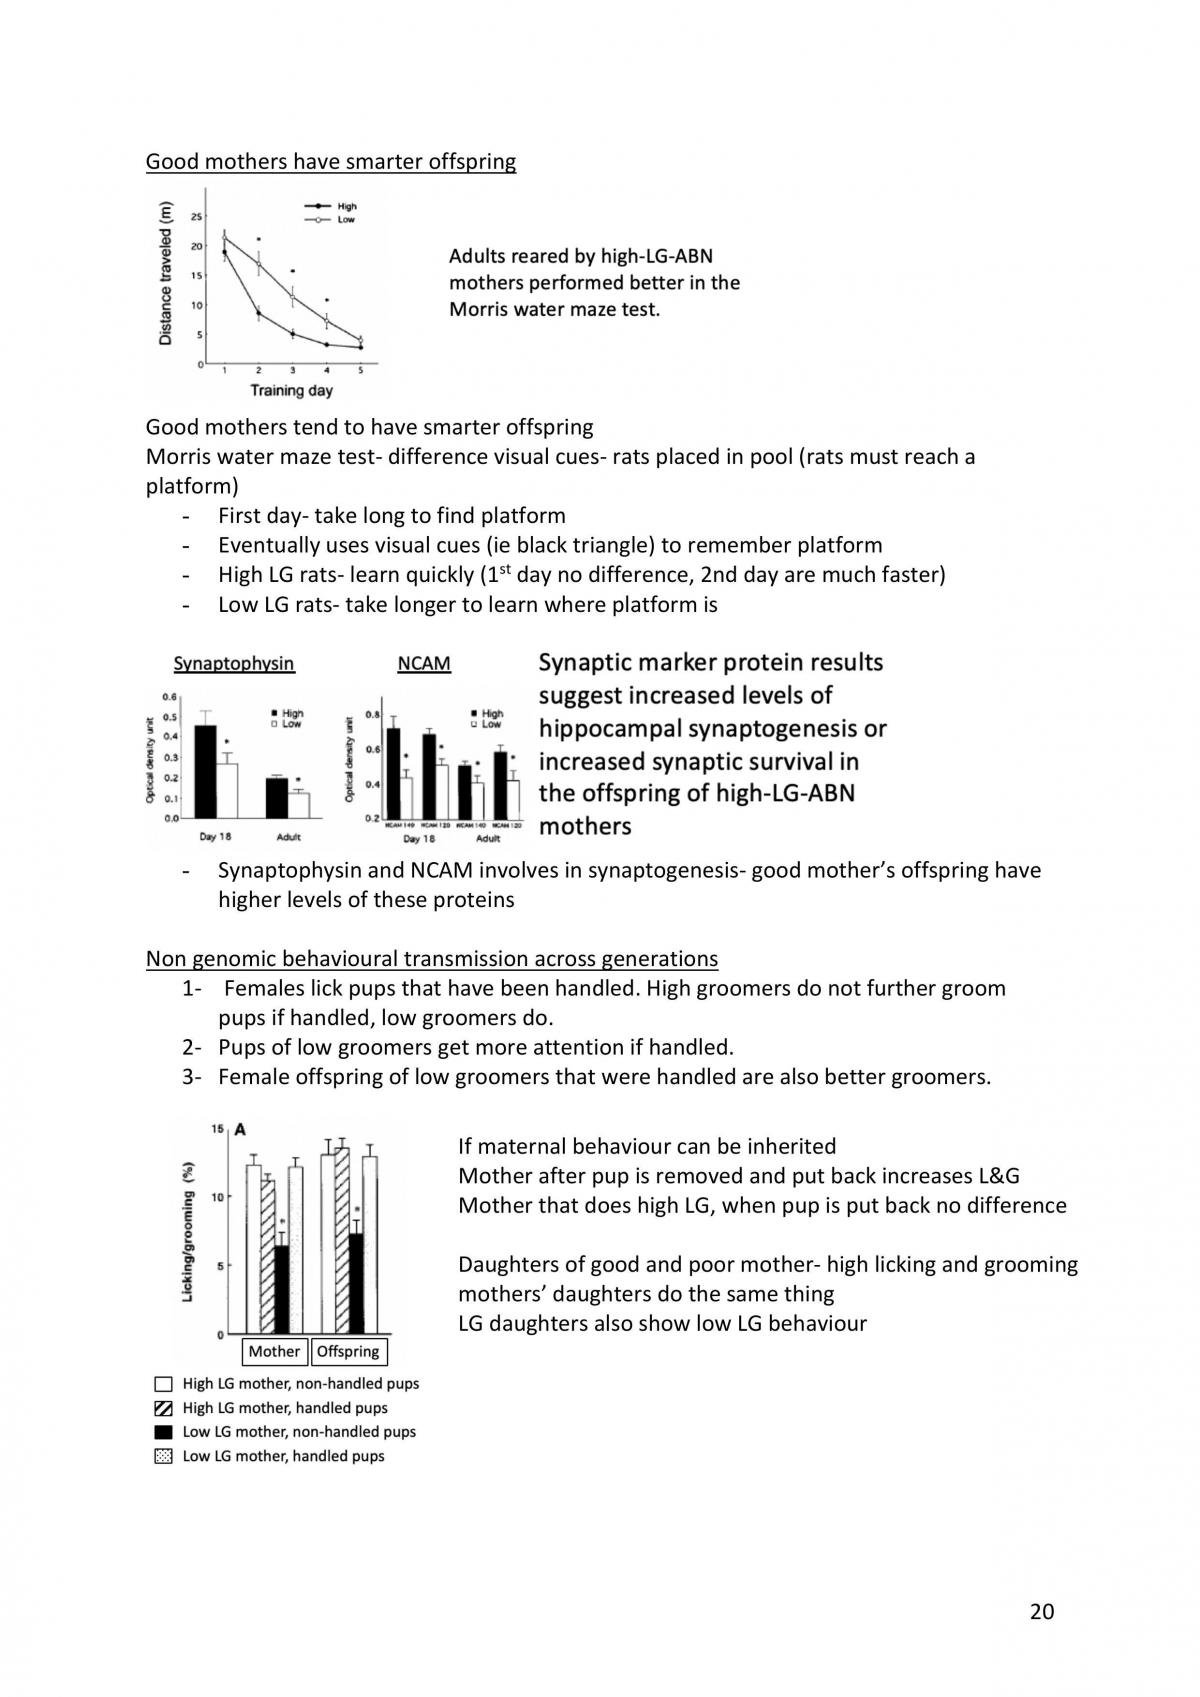 Hormones and Behaviour revision notes - Page 20